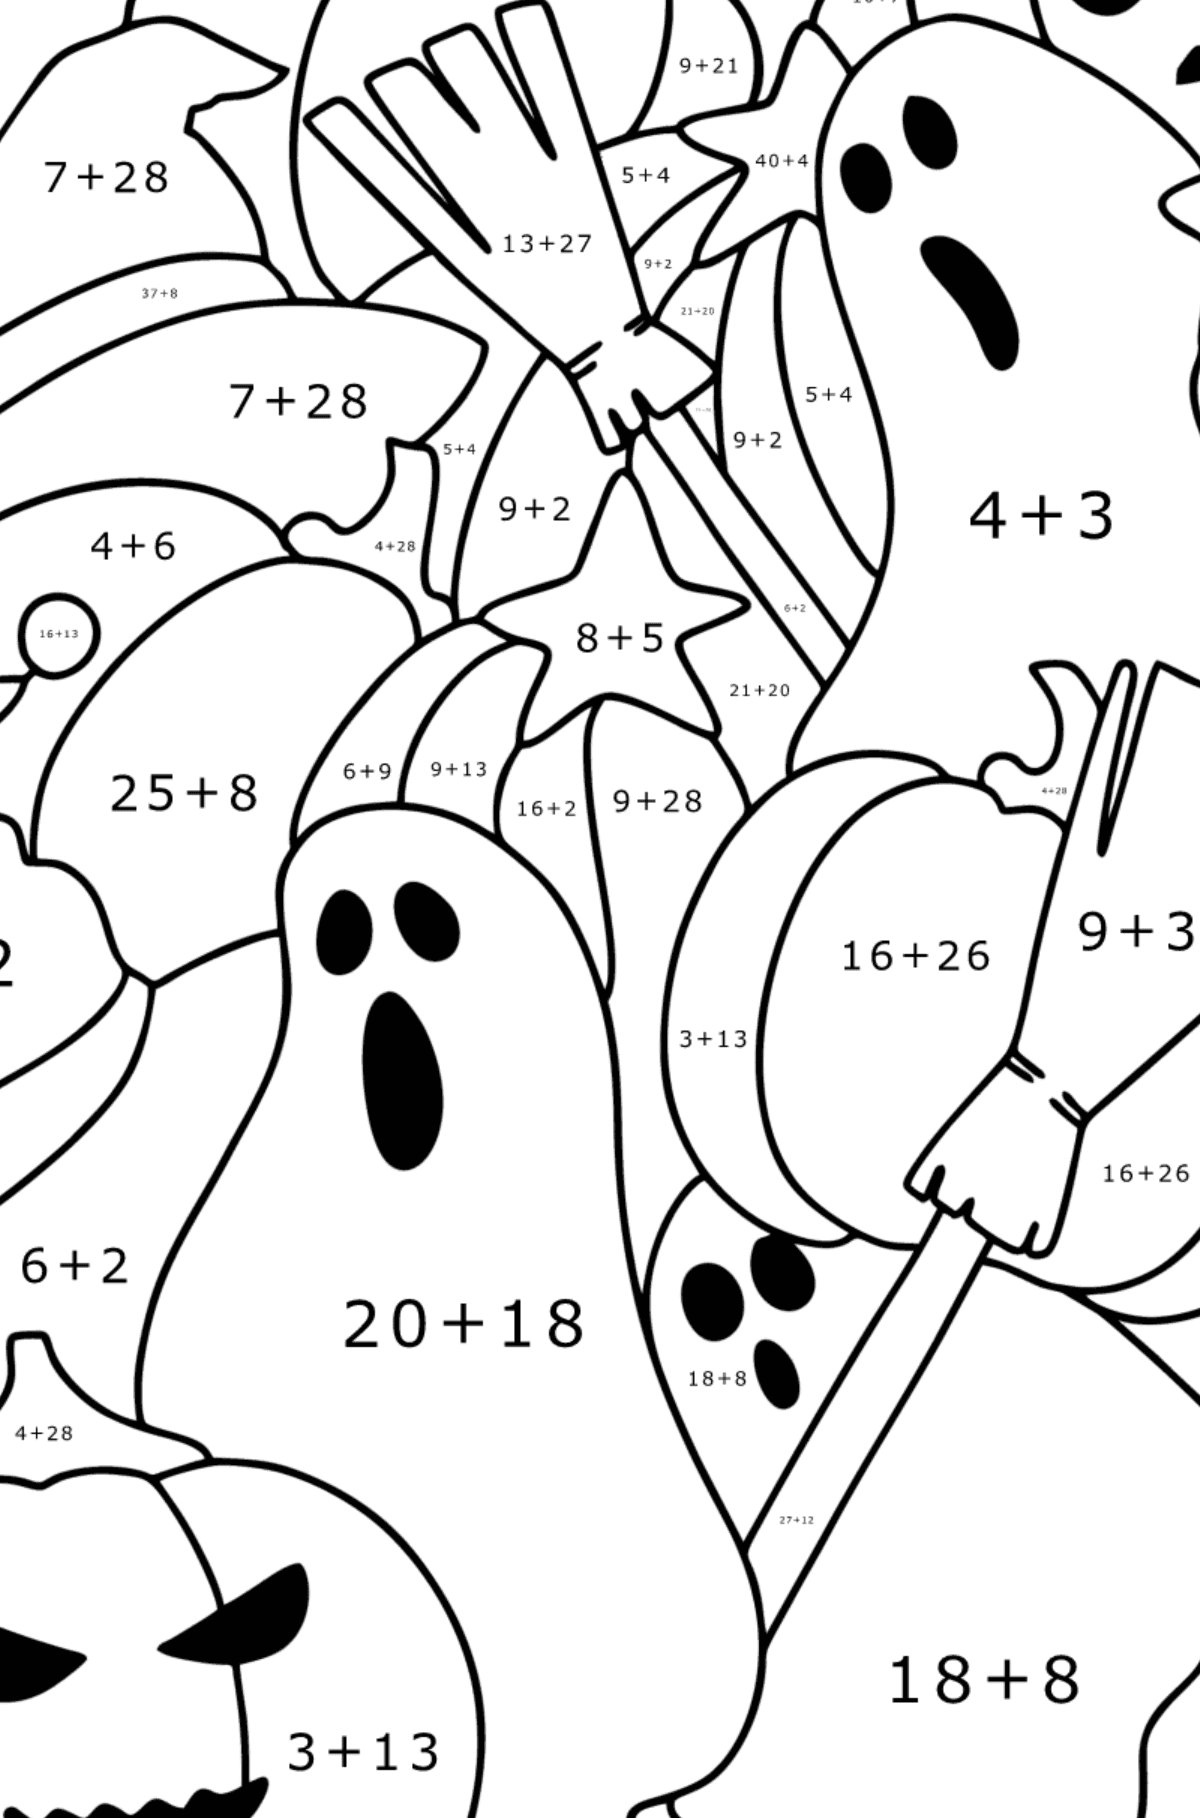 Halloween in doodle style - Halloween Coloring pages for Adults